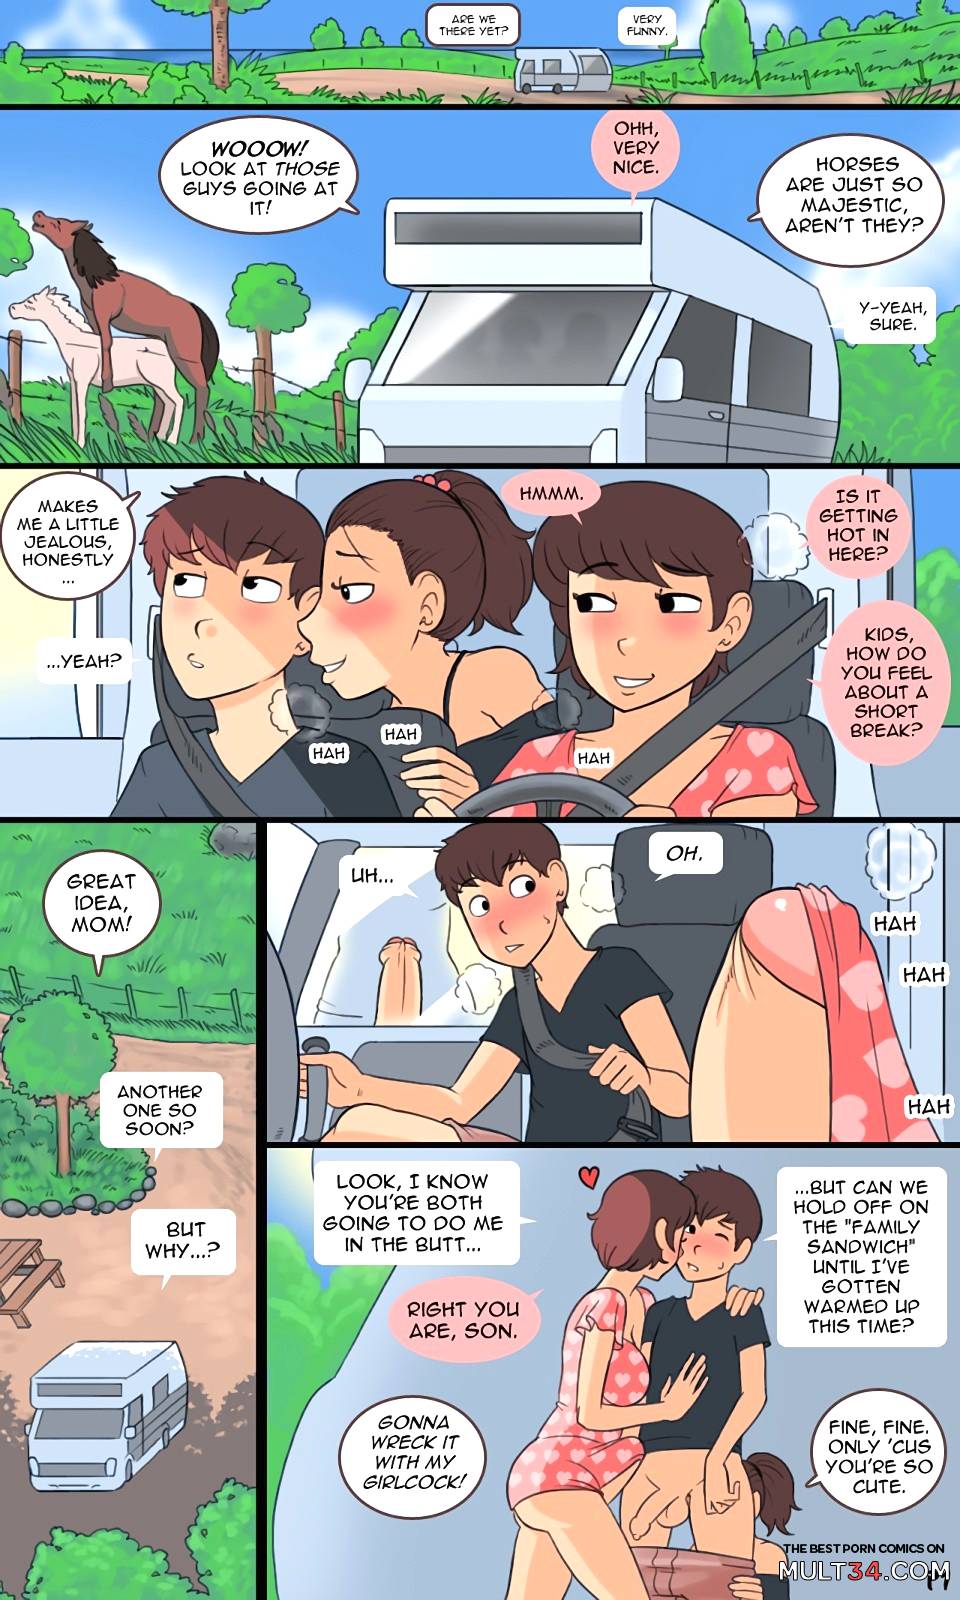 Family Sandwich page 1